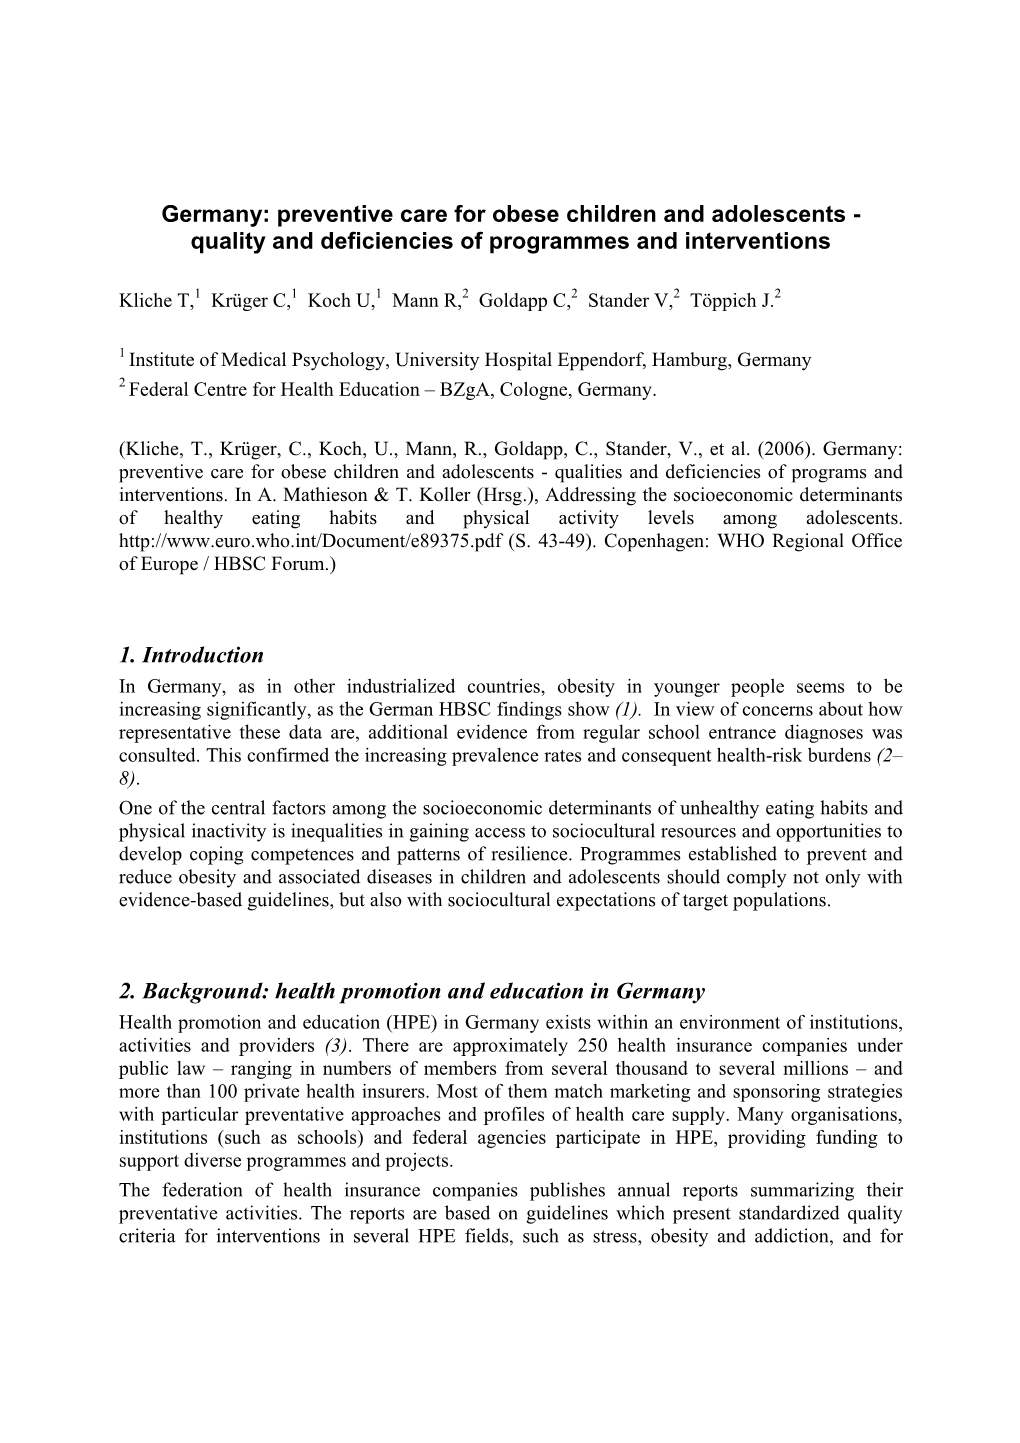 Germany: Preventive Care for Obese Children and Adolescents - Quality and Deficiencies of Programmes and Interventions